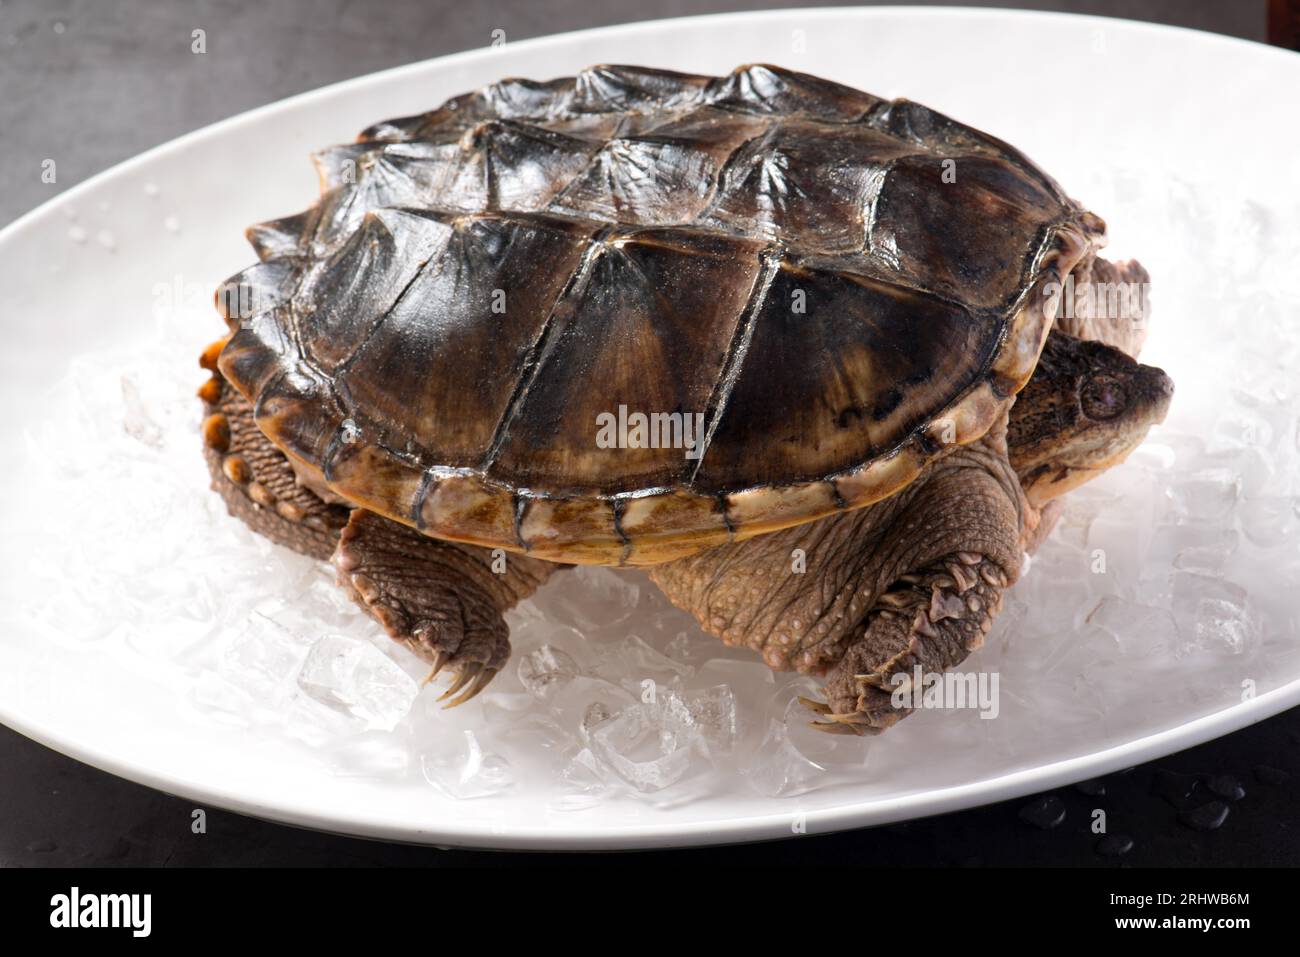 cooked turtle